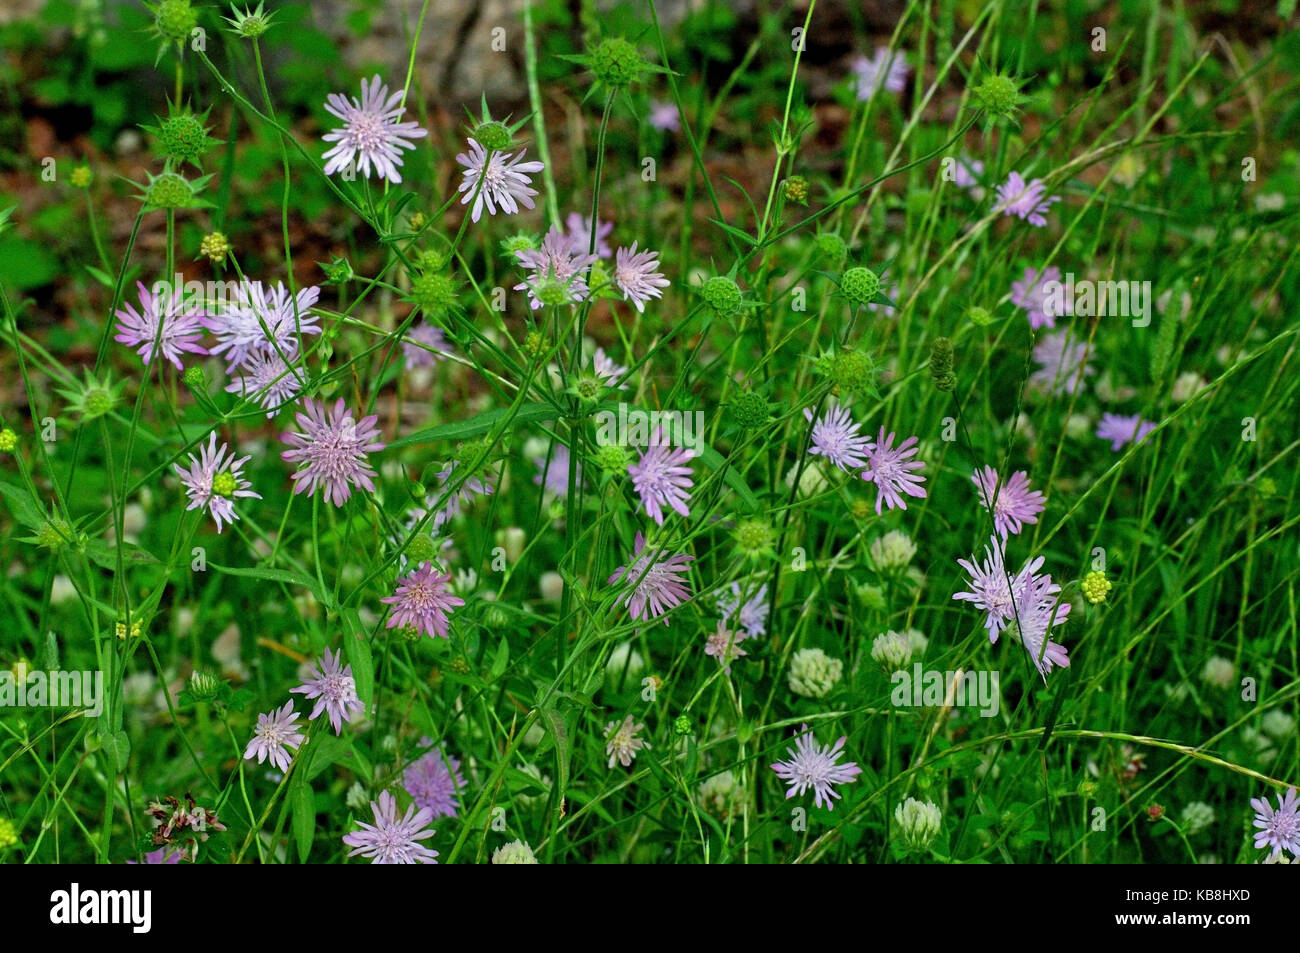 this is the wildflower Knautia integrifolia, the Whole-leaved Scabious, from the family Caprifoliaceae (Dipsacaceae) Stock Photo